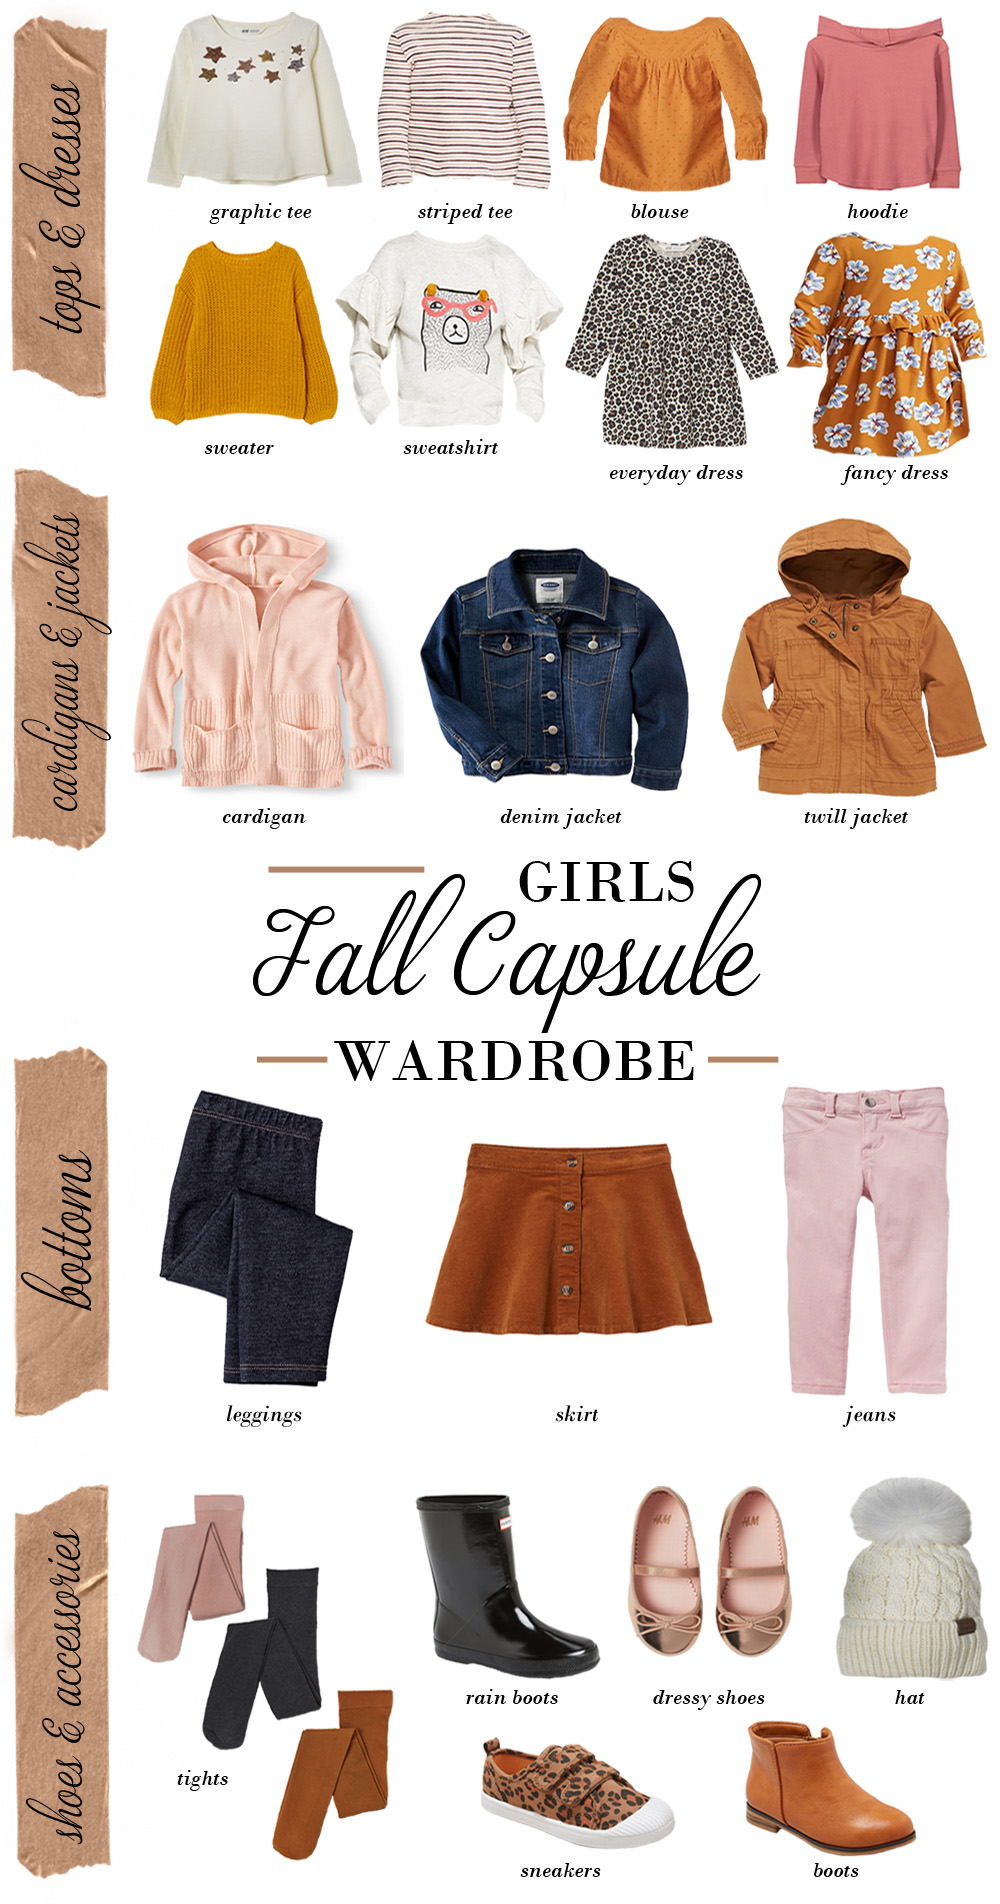 12 CAPSULE WARDROBE ACCESSORIES TO SHOP FOR FALL + WINTER